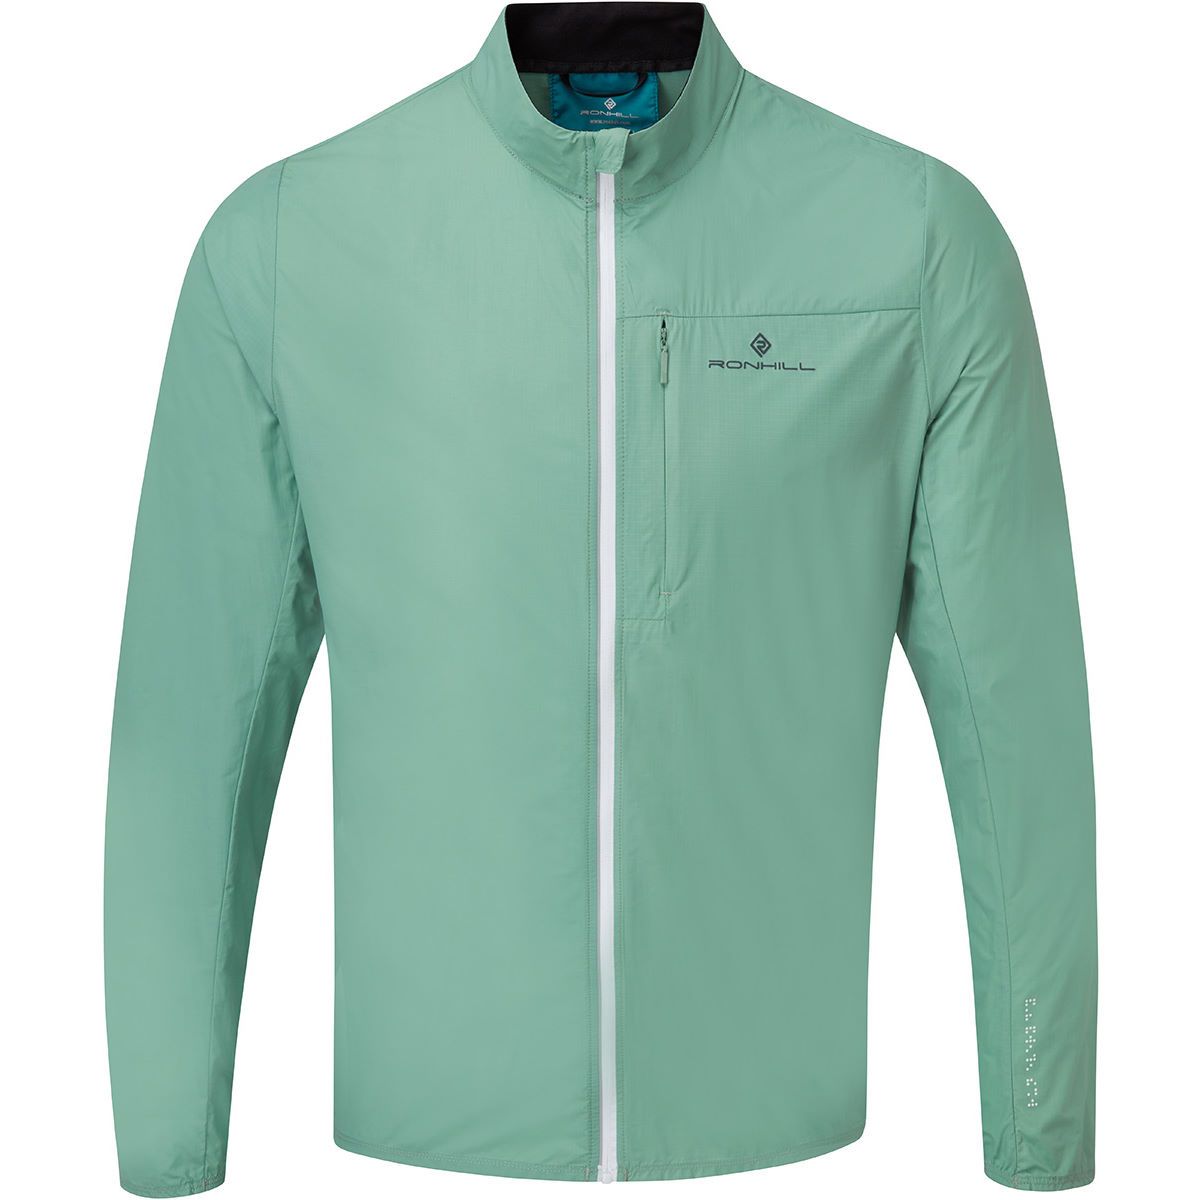 ron-hill-mens-tech-ltw-jacket-willowbright-white